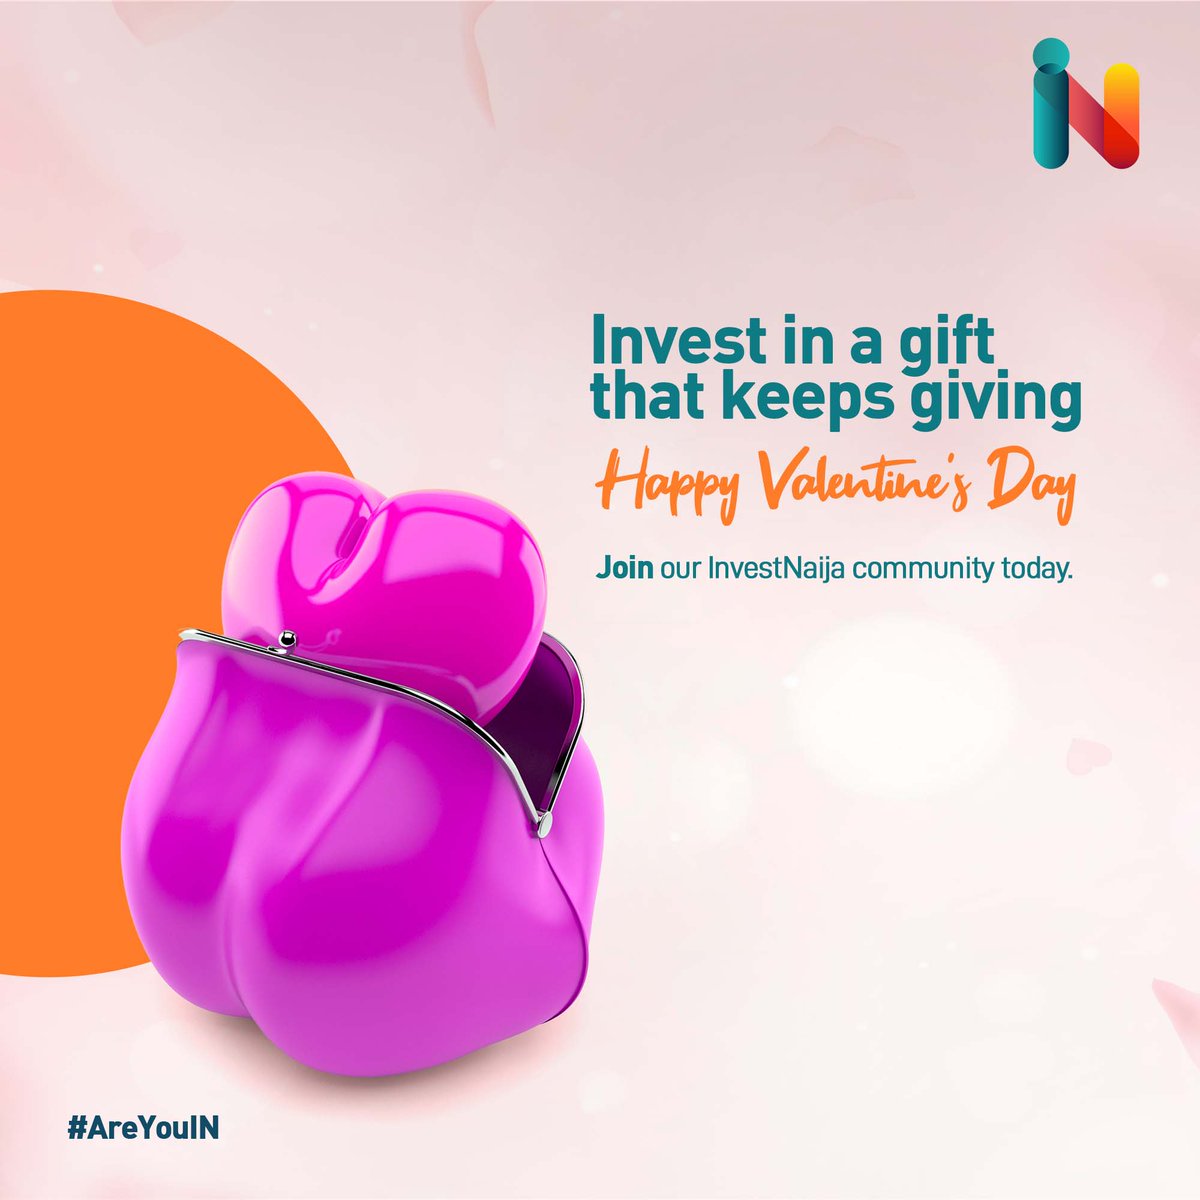 This Valentine's Day, invest in financial literacy; a gift that never stops giving.

Get started by joining our community at investnaija.com

#chapelhilldenham #deliveringresults #valentinesday